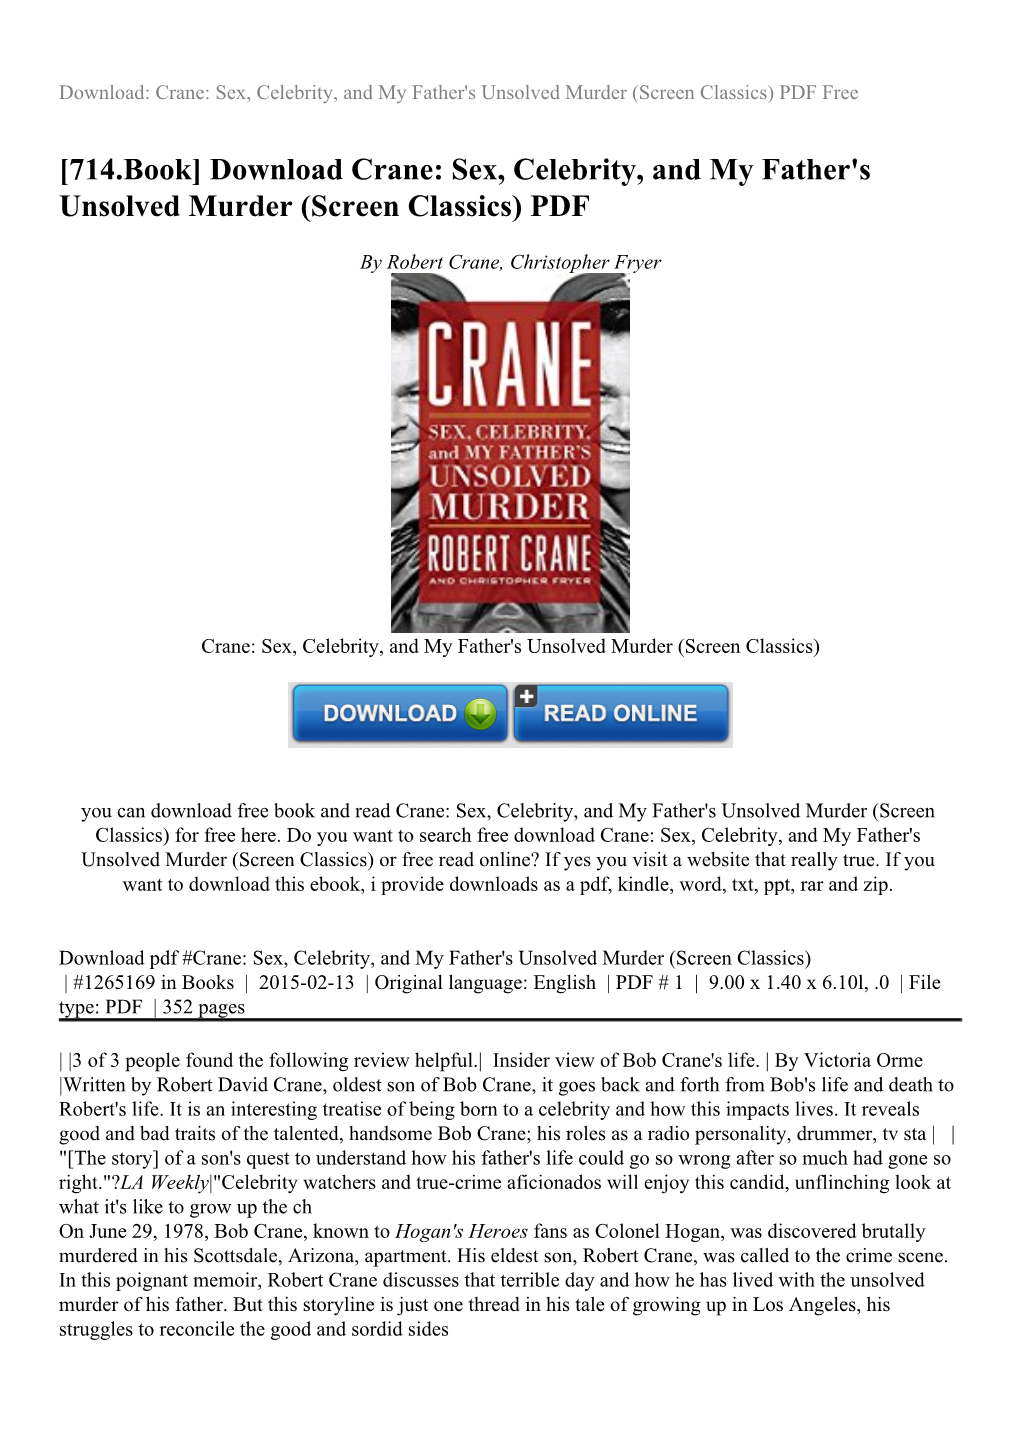 Download Crane: Sex, Celebrity, and My Father's Unsolved Murder (Screen Classics) PDF